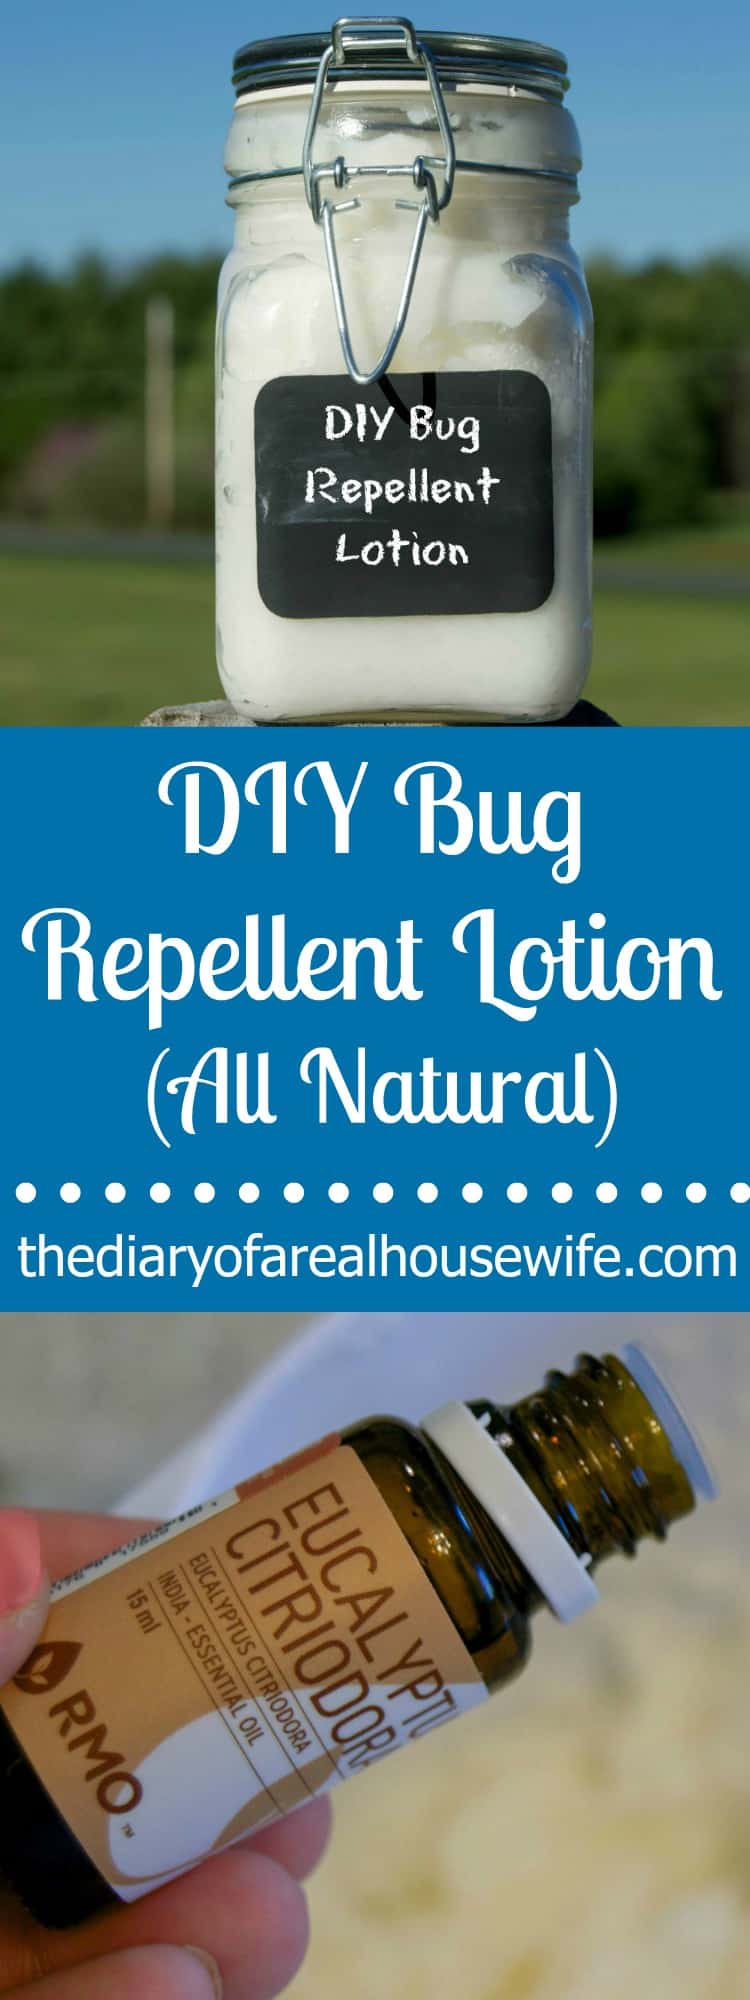 DIY Bug Repellent Lotion All Natural The Diary of a Real Housewife